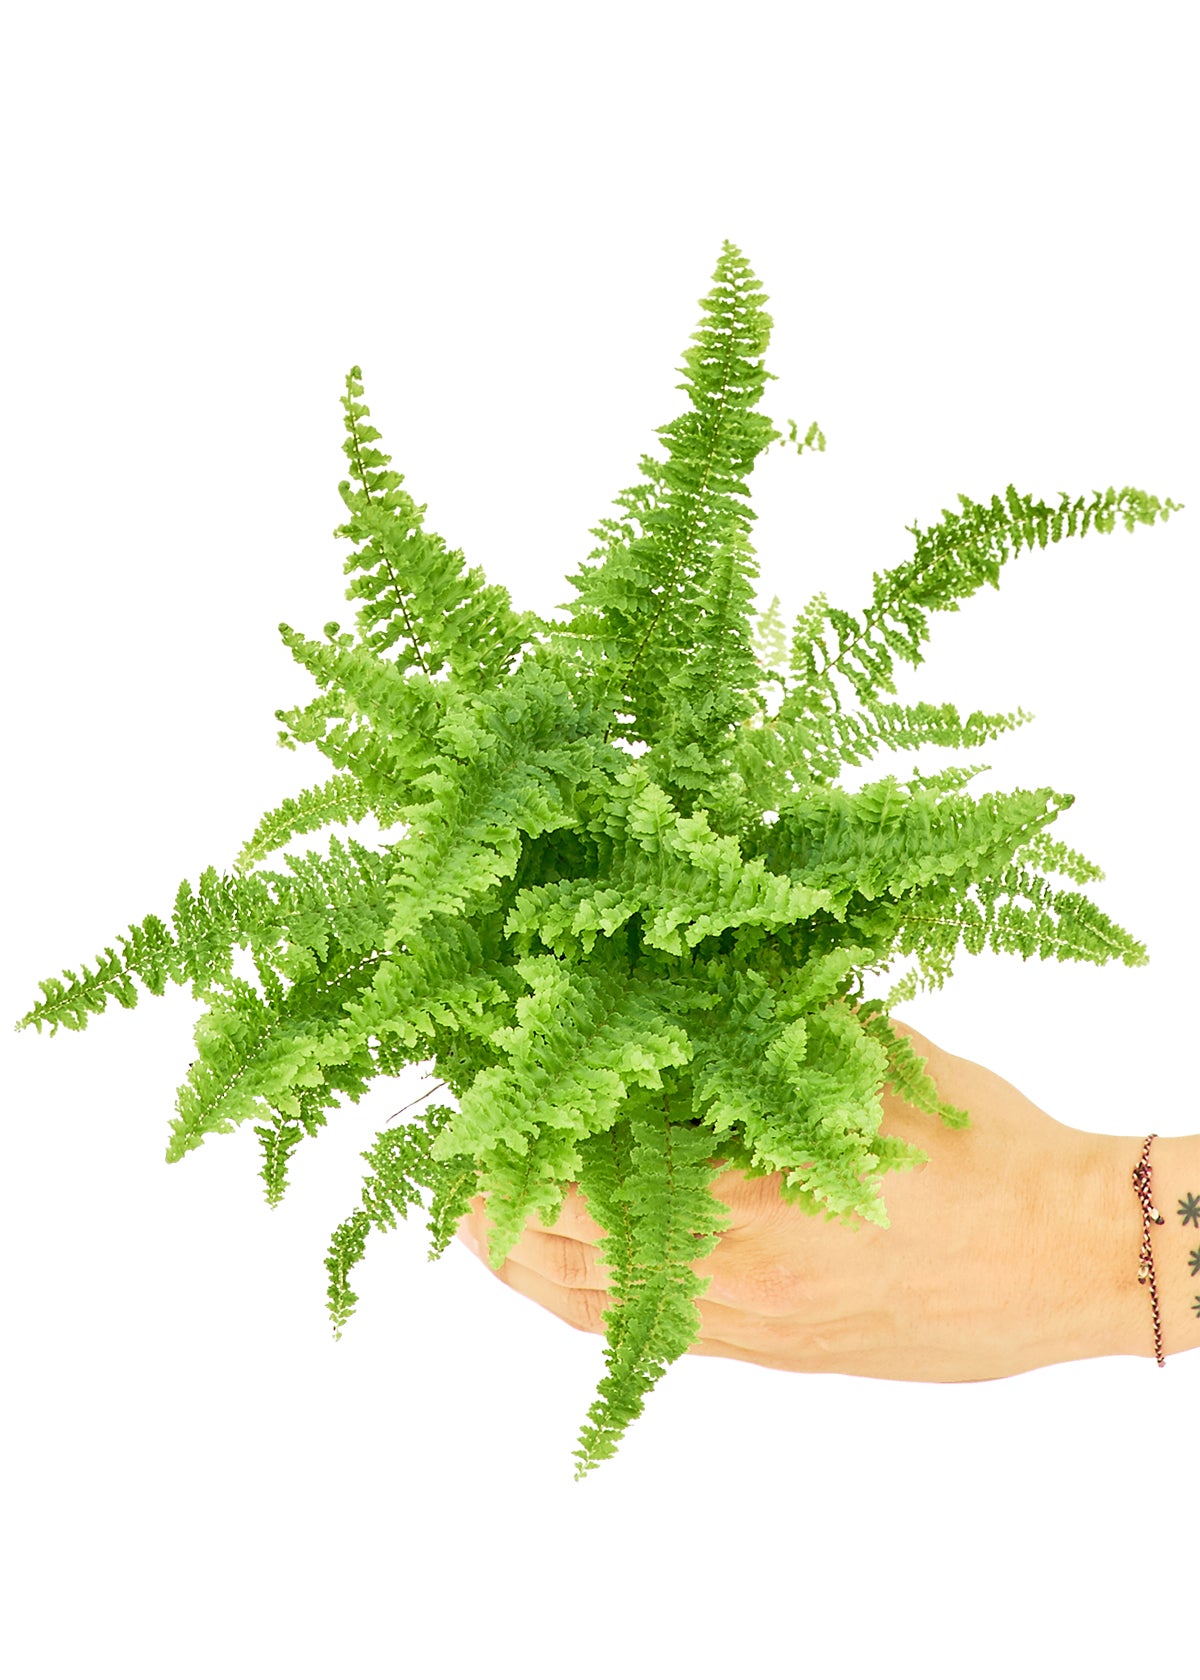 Small size Boston Fern in a growers pot with a white background held by a hand to show top view